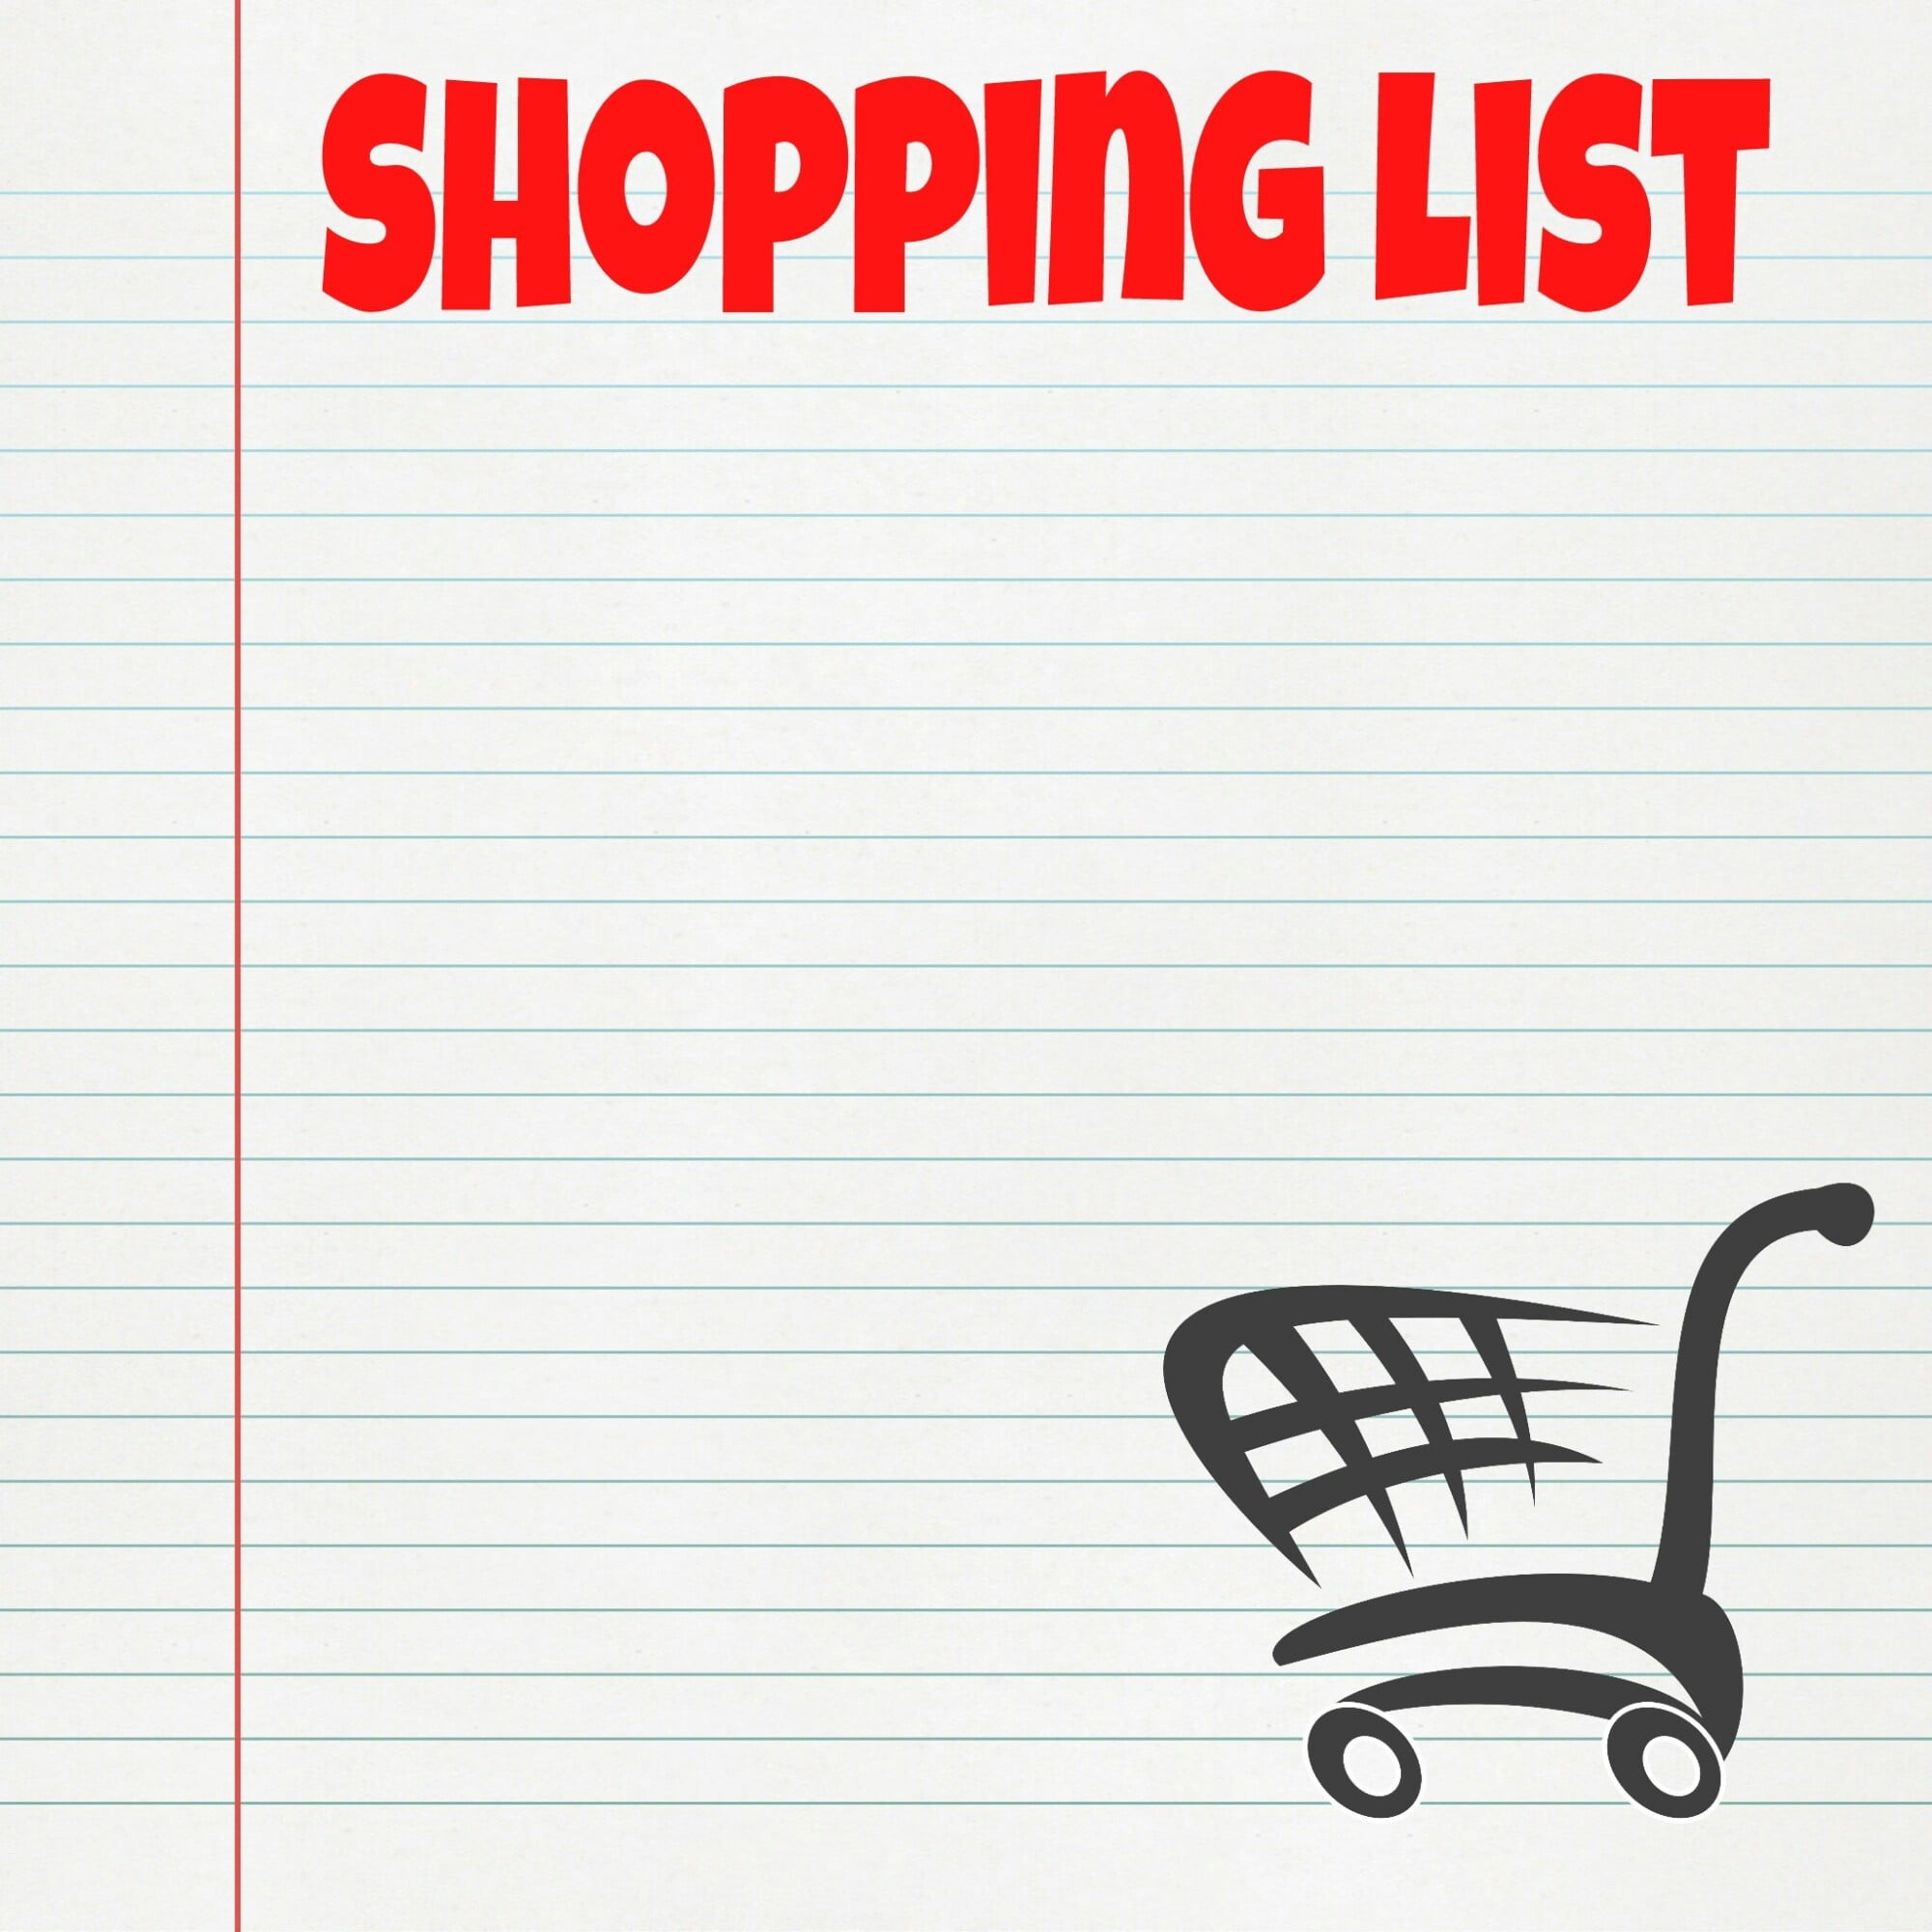 No matter if you're buying groceries or clothes, it's easy to go overboard. That's why it's so important that you create a budget shopping list.